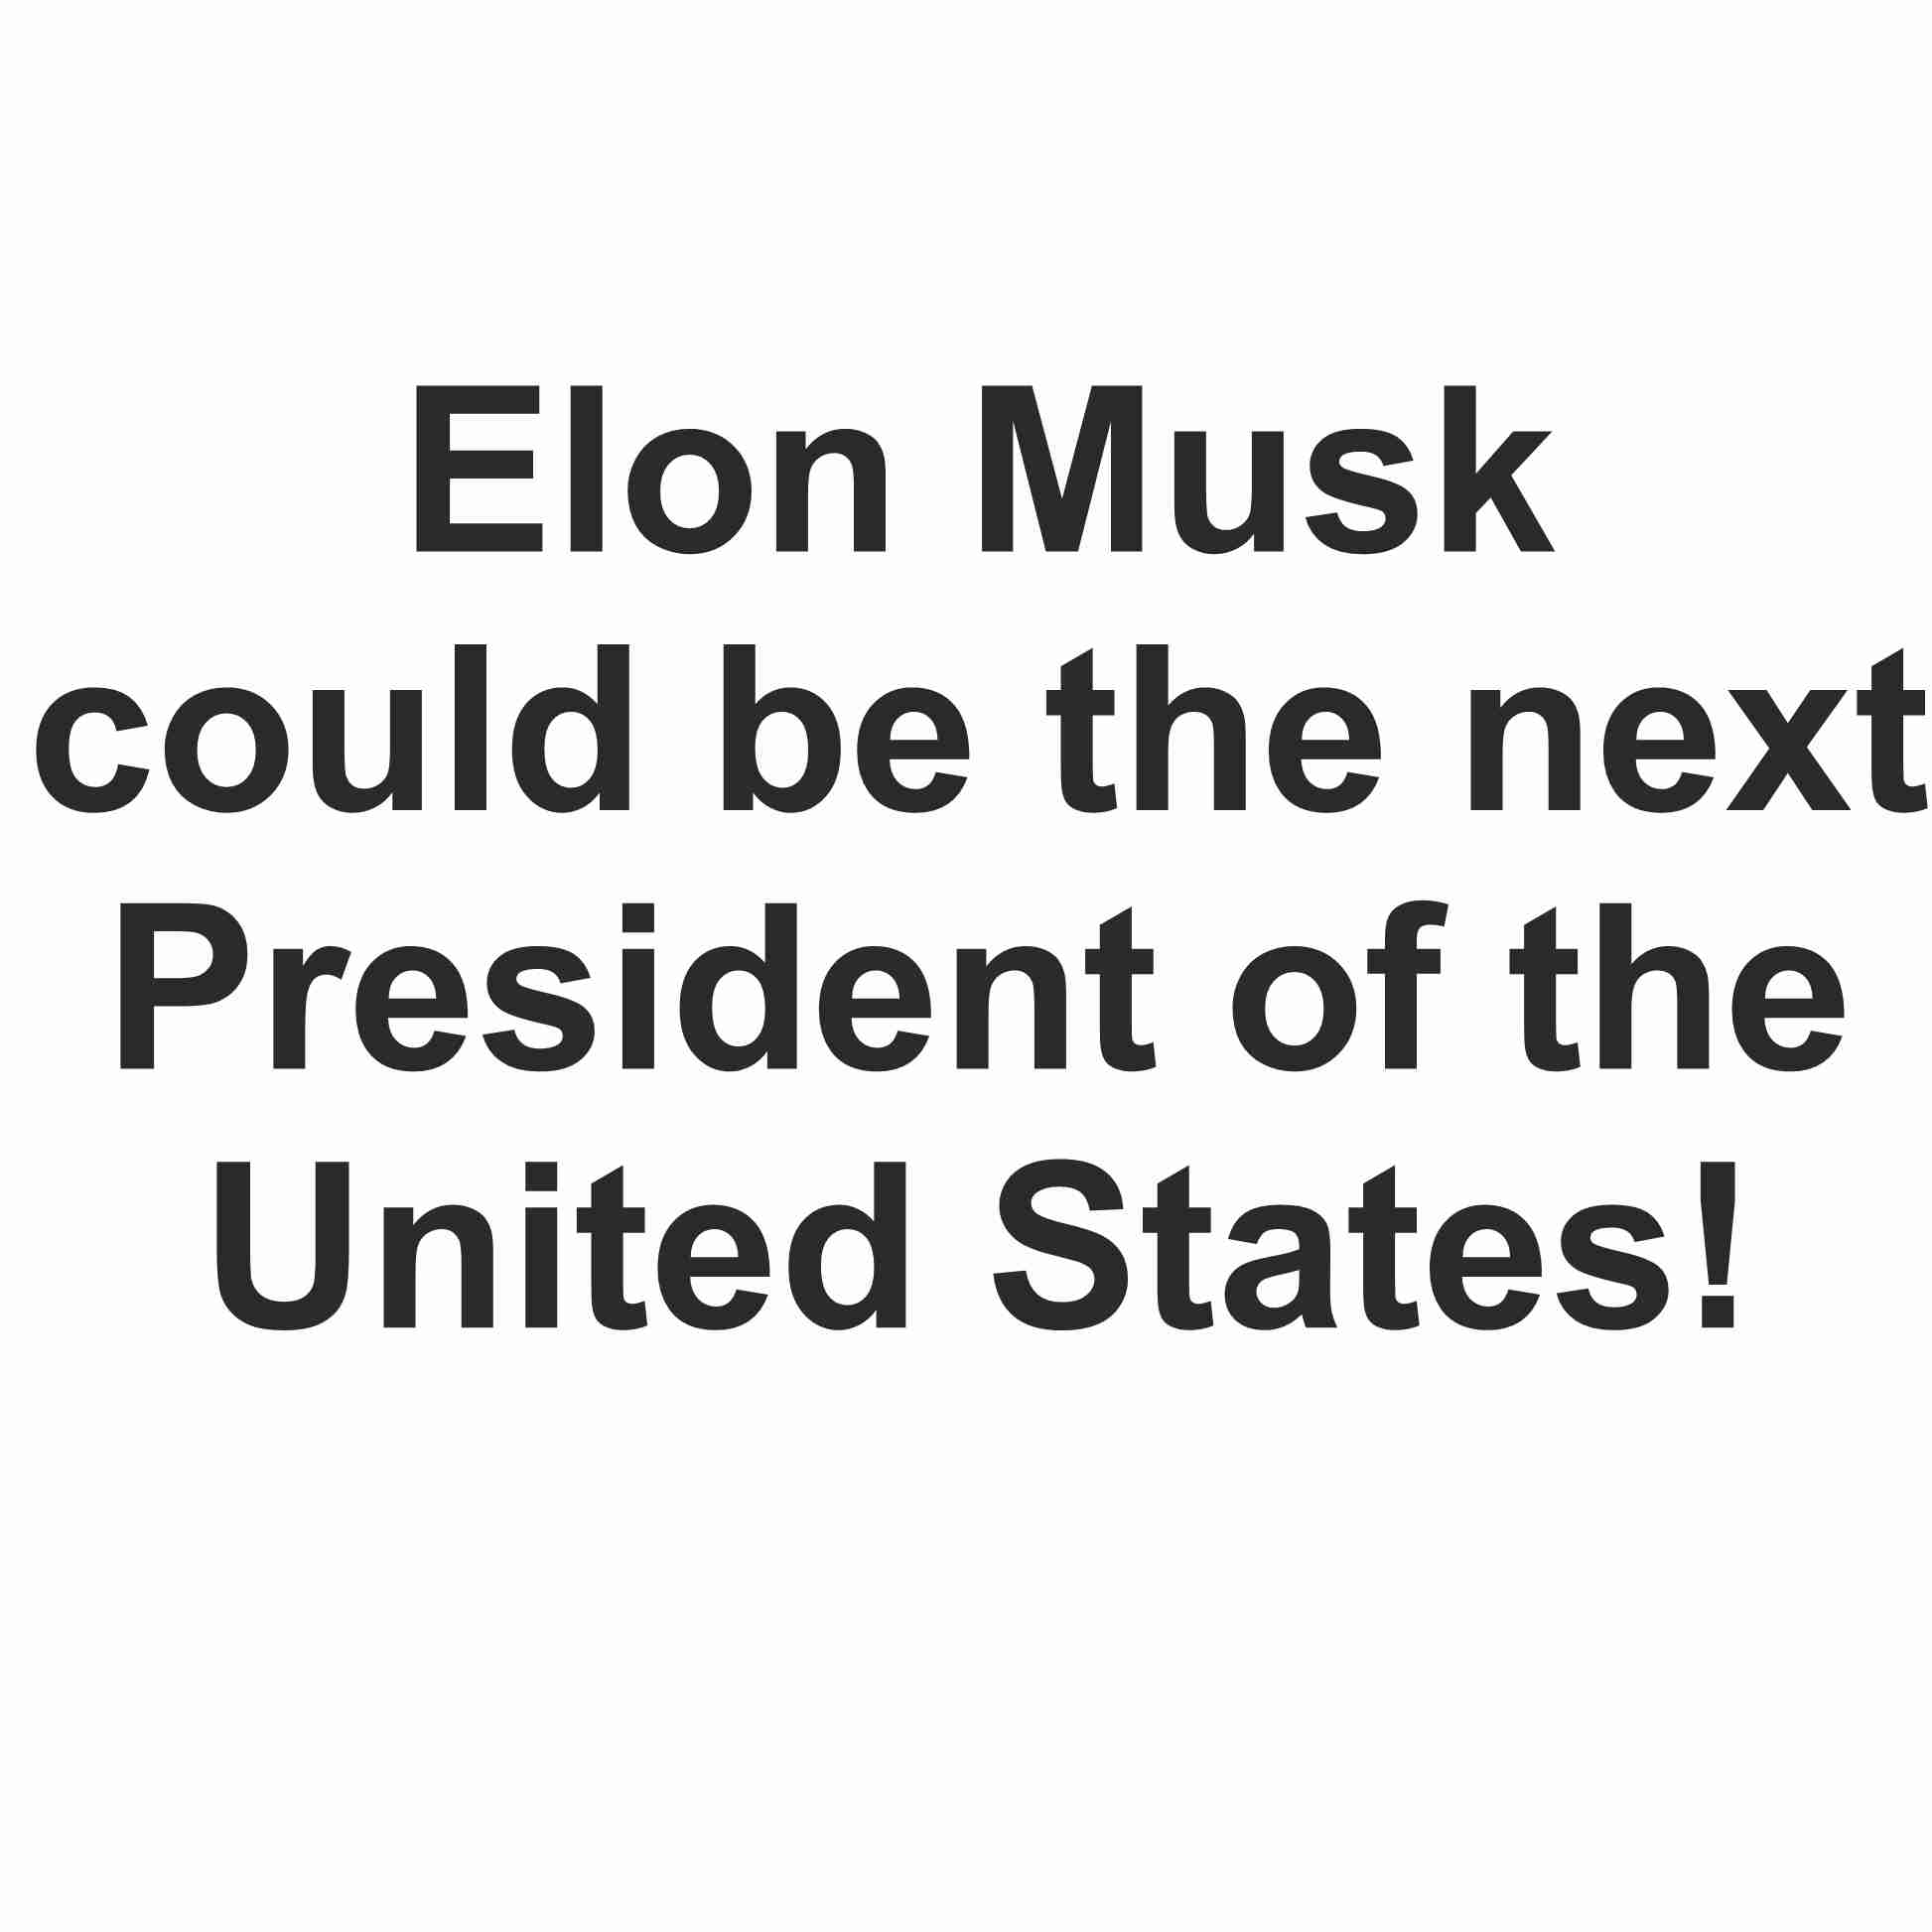 Elon Musk could be the next President of the United States!